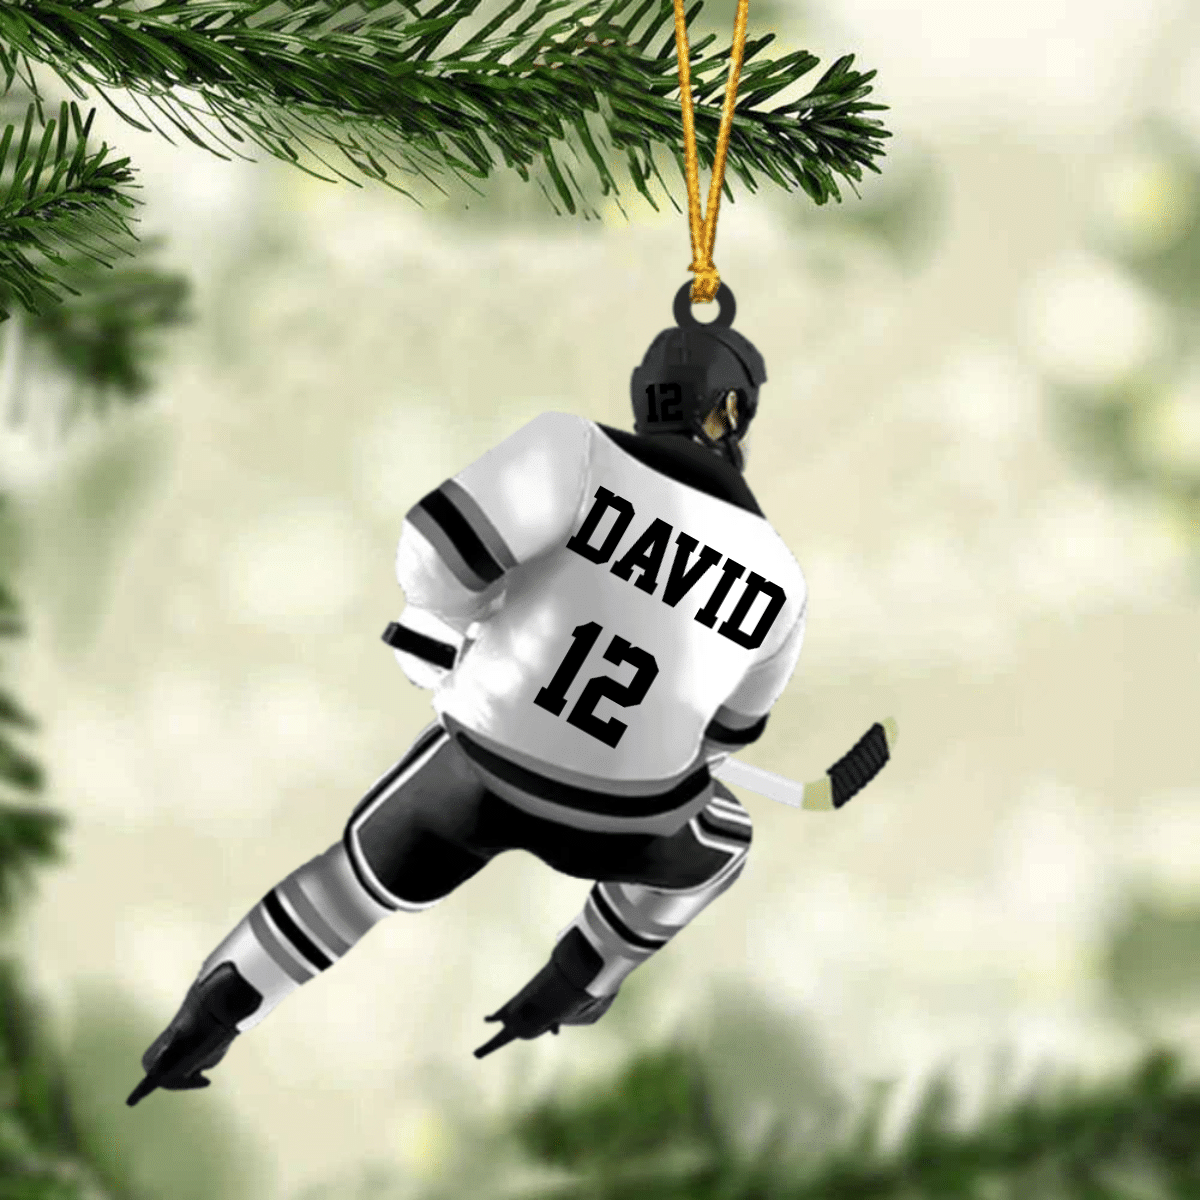 Personalized Ice Hockey Player Christmas Ornament - Great Gift Idea For Ice Hockey Lovers